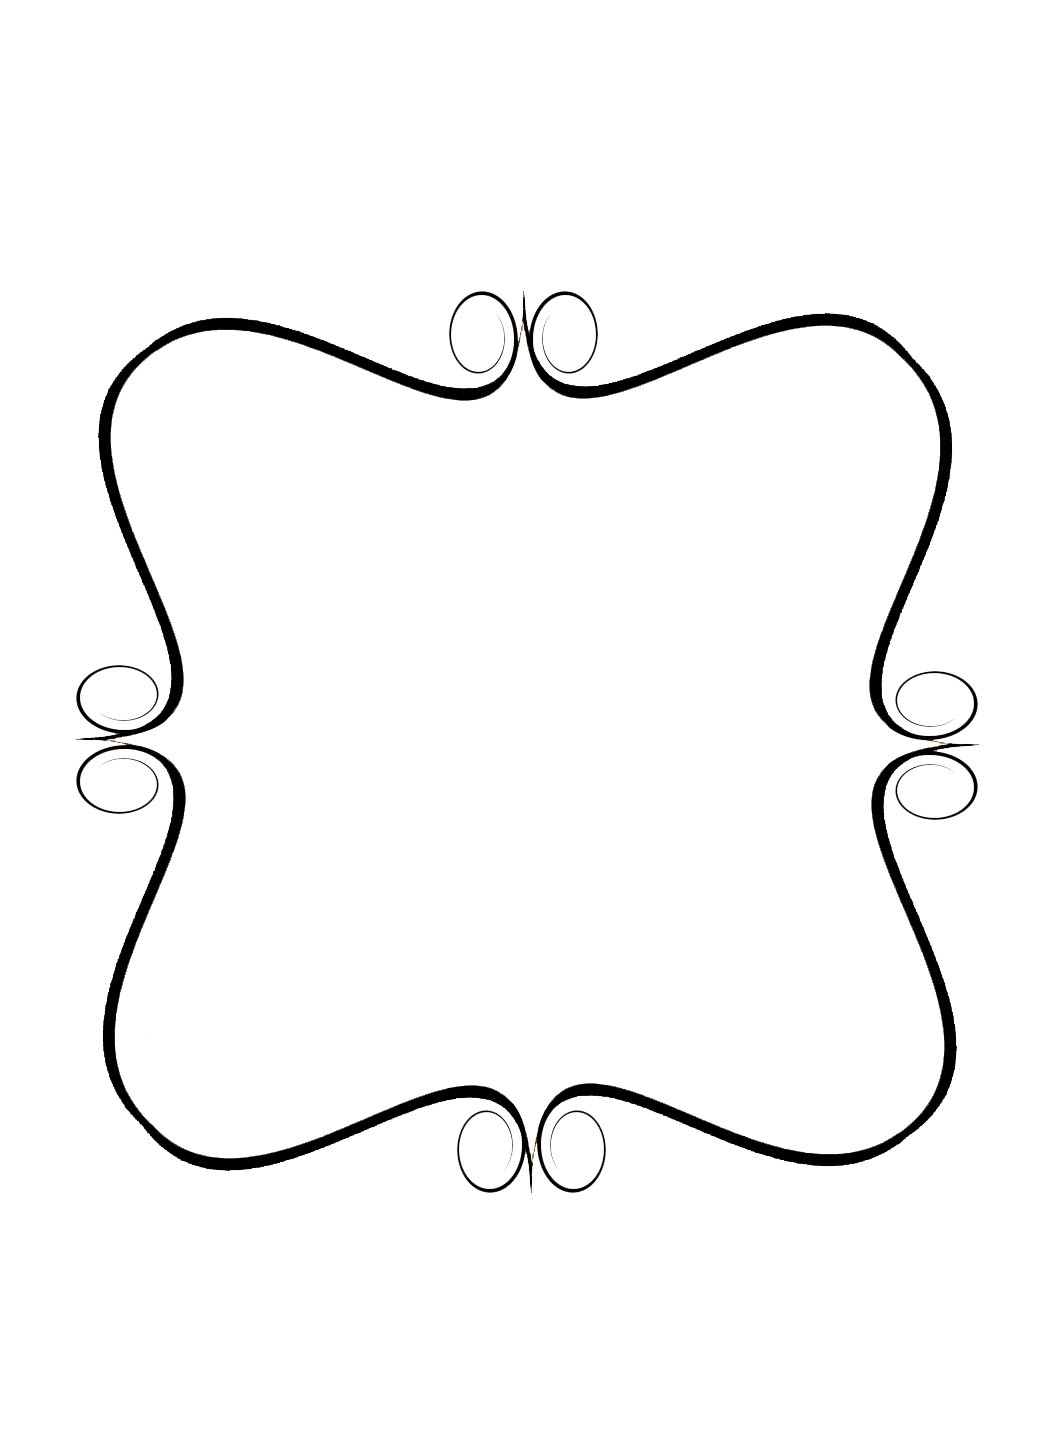 Simple Line Border Clipart - Free Clipart Images